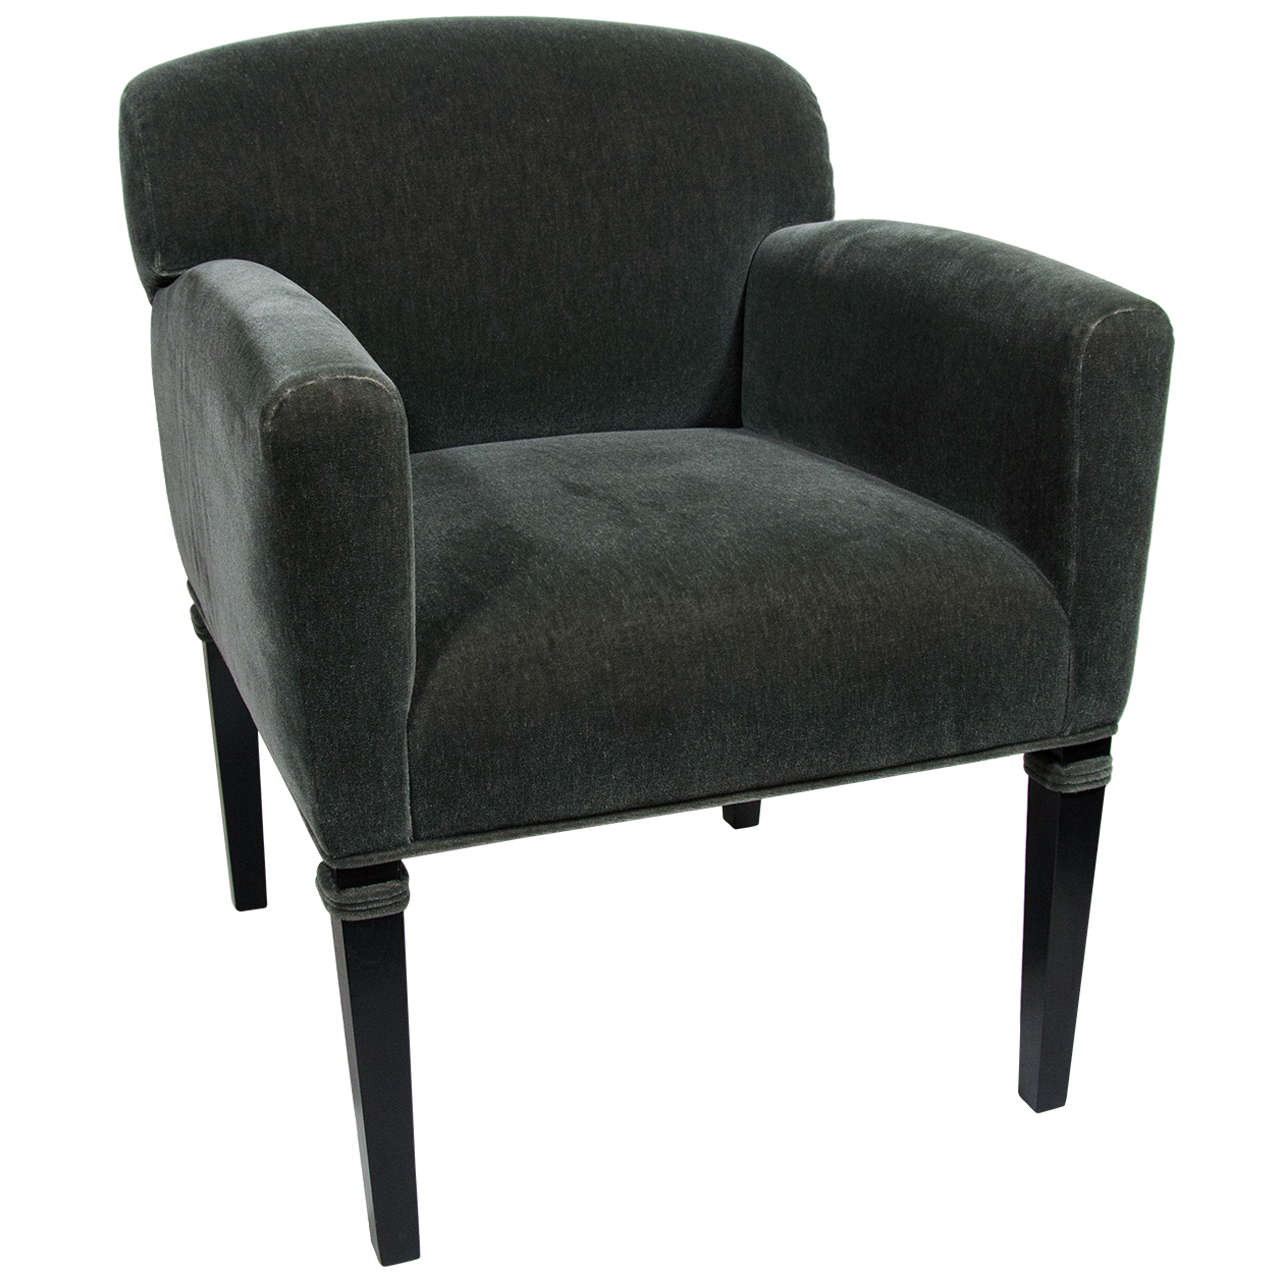 Gorgeous Art Deco style occasional chair with low back design and modern profile.  Upholstered in a luxurious green moss mohair with grey undertones. The chair has ebonized wood legs with a satin finish and features mohair trim piping near the tops